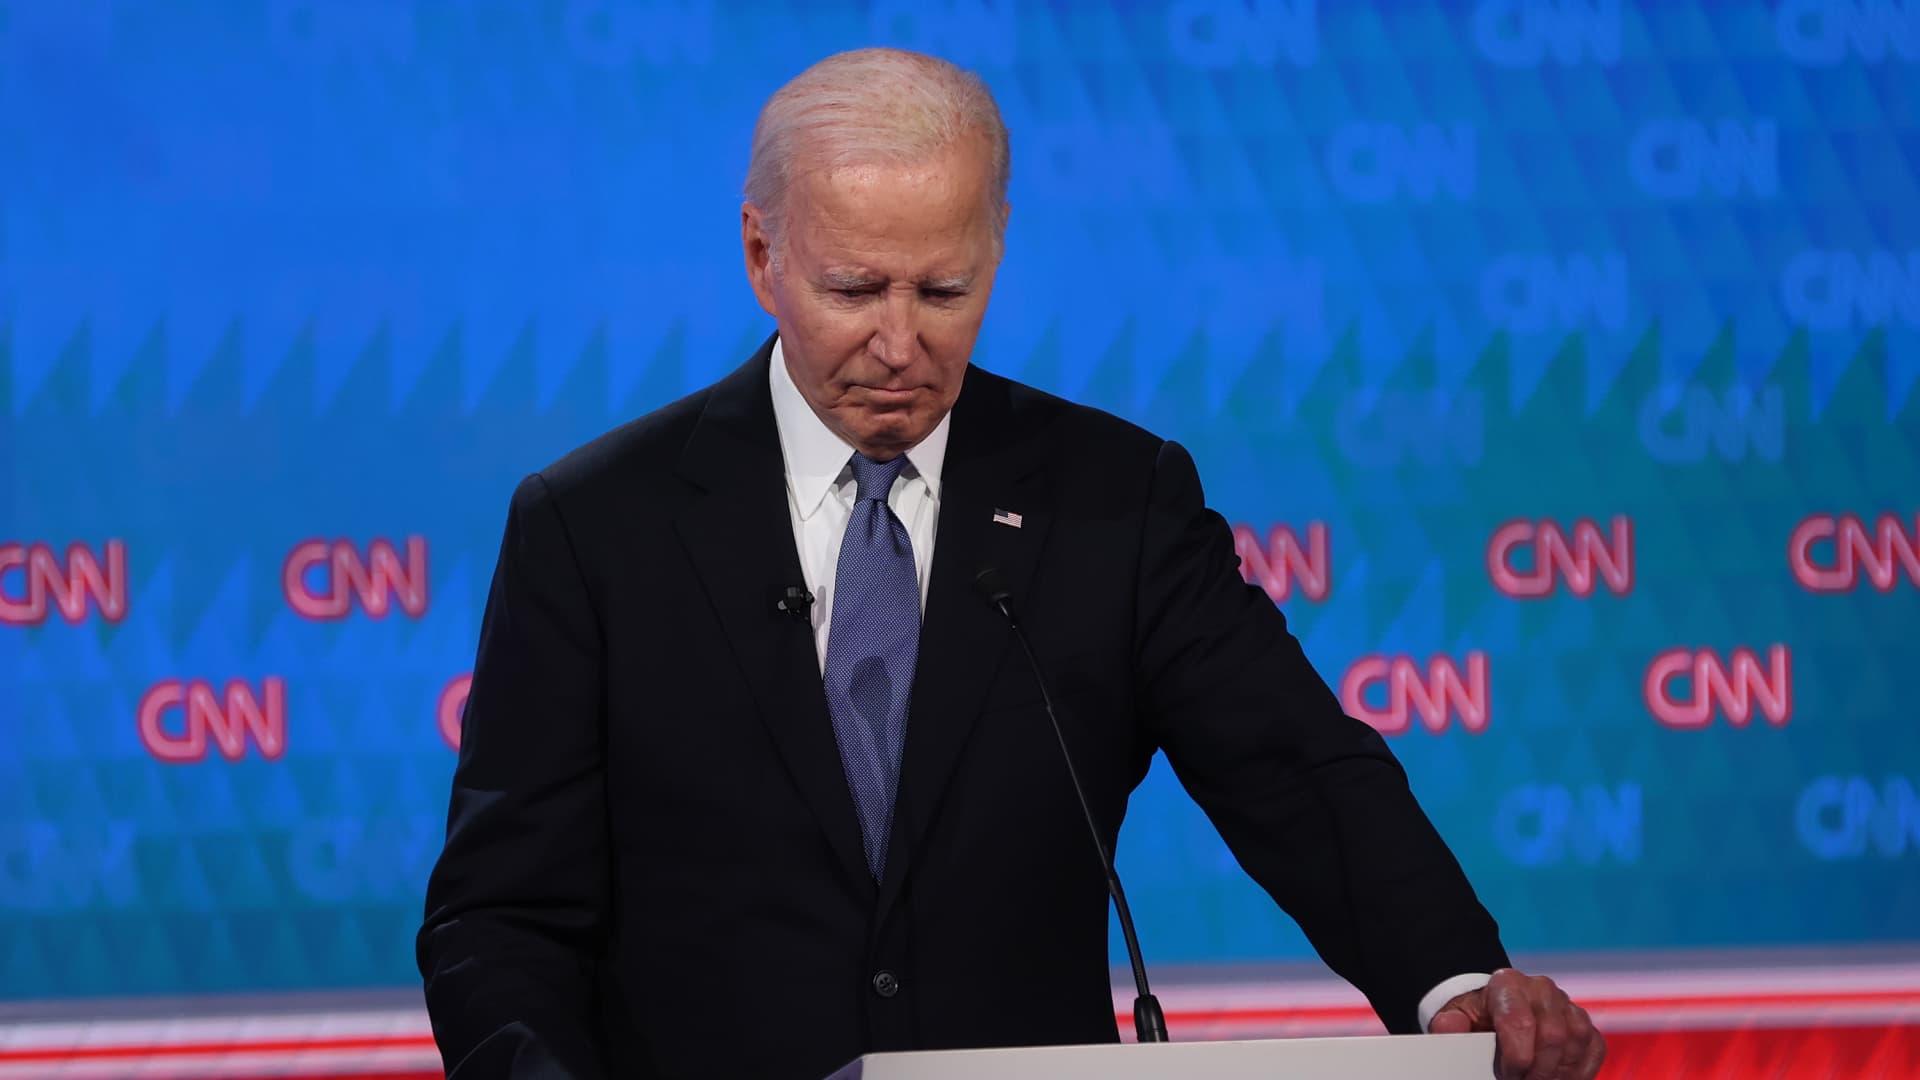 The New York Times editorial board is urging Biden to withdraw from the presidential race